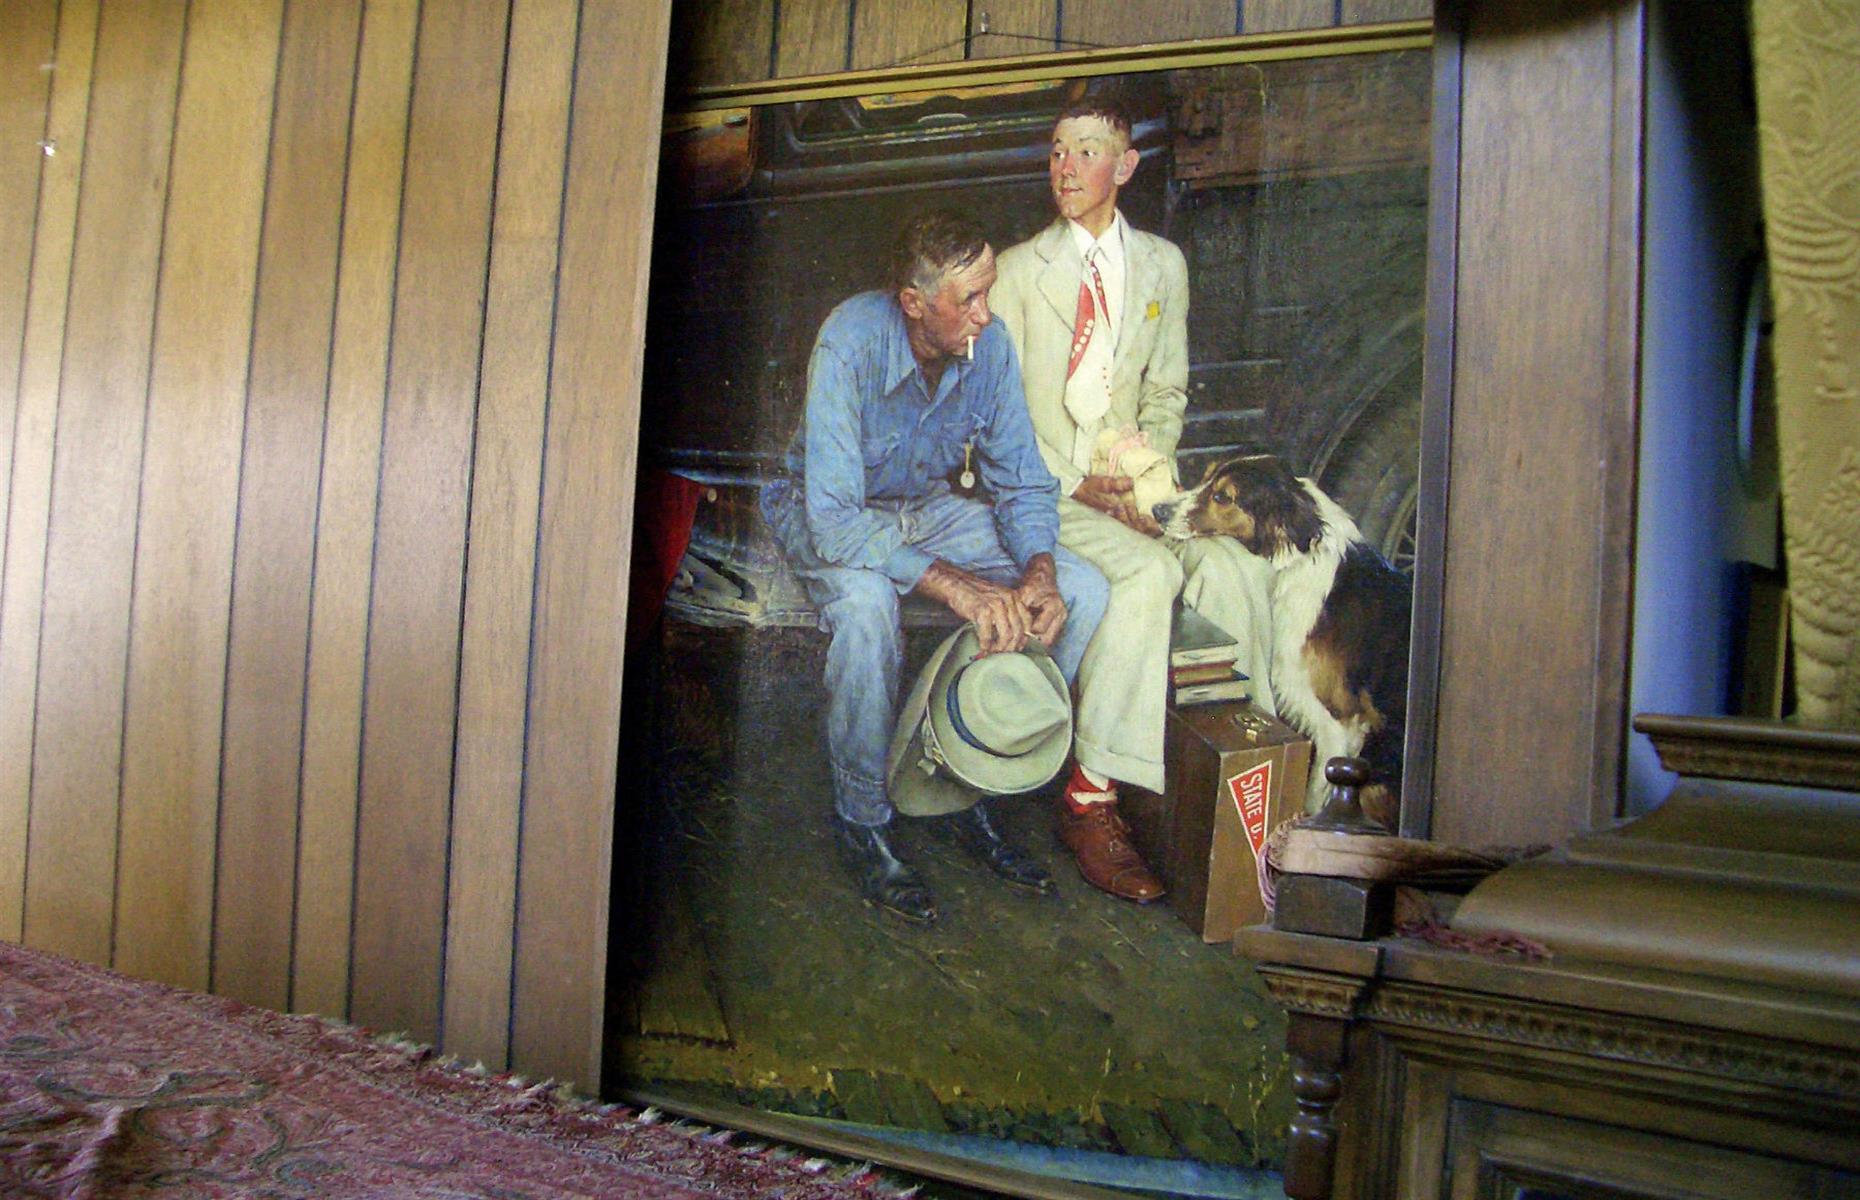 The Norman Rockwell painting hidden behind a wall